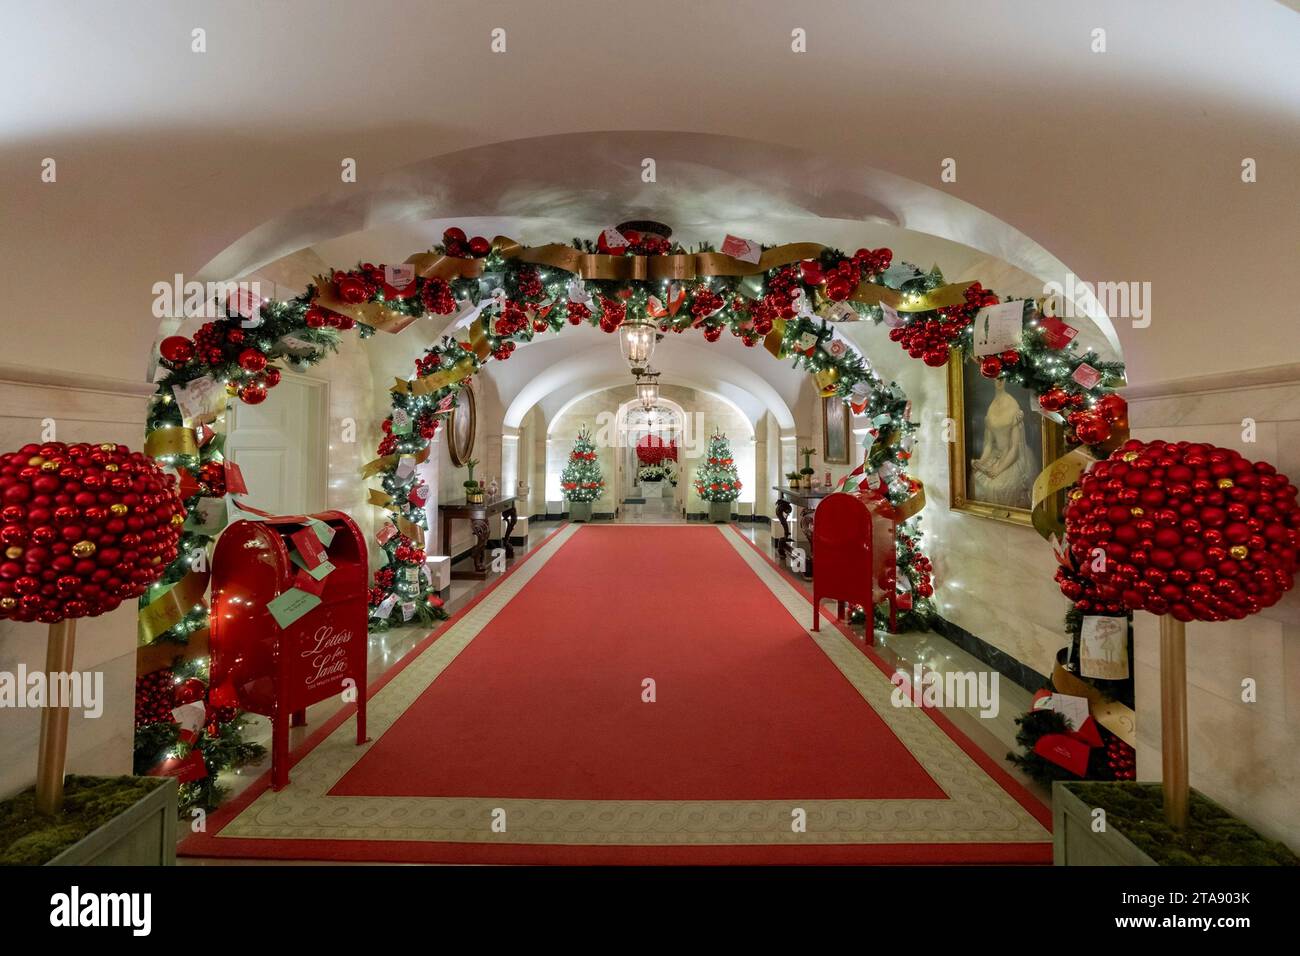 Washington, United States. 26th Nov, 2023. Holiday messages from Americans line the arches of the Ground Floor Corridor as part of the decorations at the annual White House Christmas, November 28, 2023 in Washington, DC The theme is “Magic, Wonder and Joy,” and will welcome approximately 100,000 visitors during the holiday season. Credit: Katie Ricks/White House Photo/Alamy Live News Stock Photo